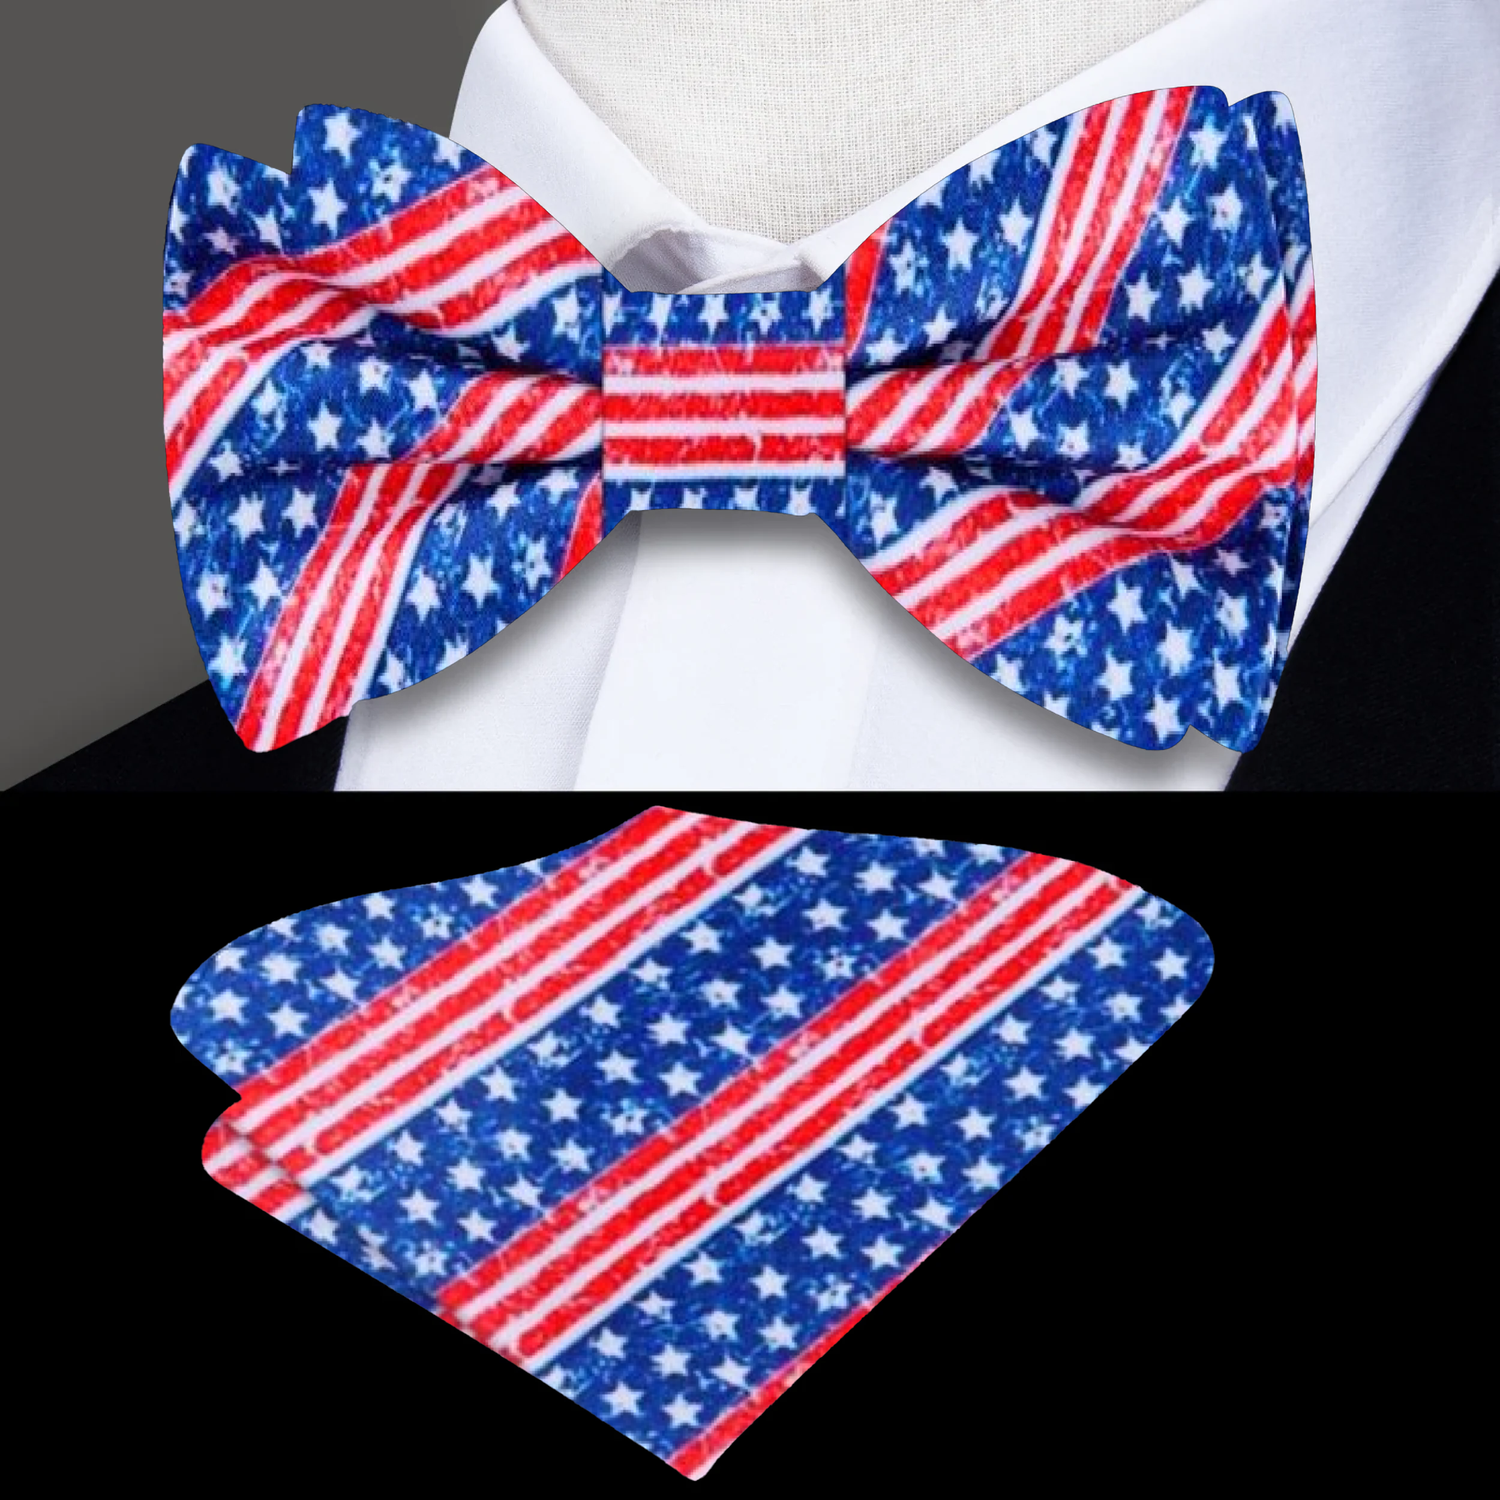 Blue, Red, White Stars and Stripes Bow Tie and Square